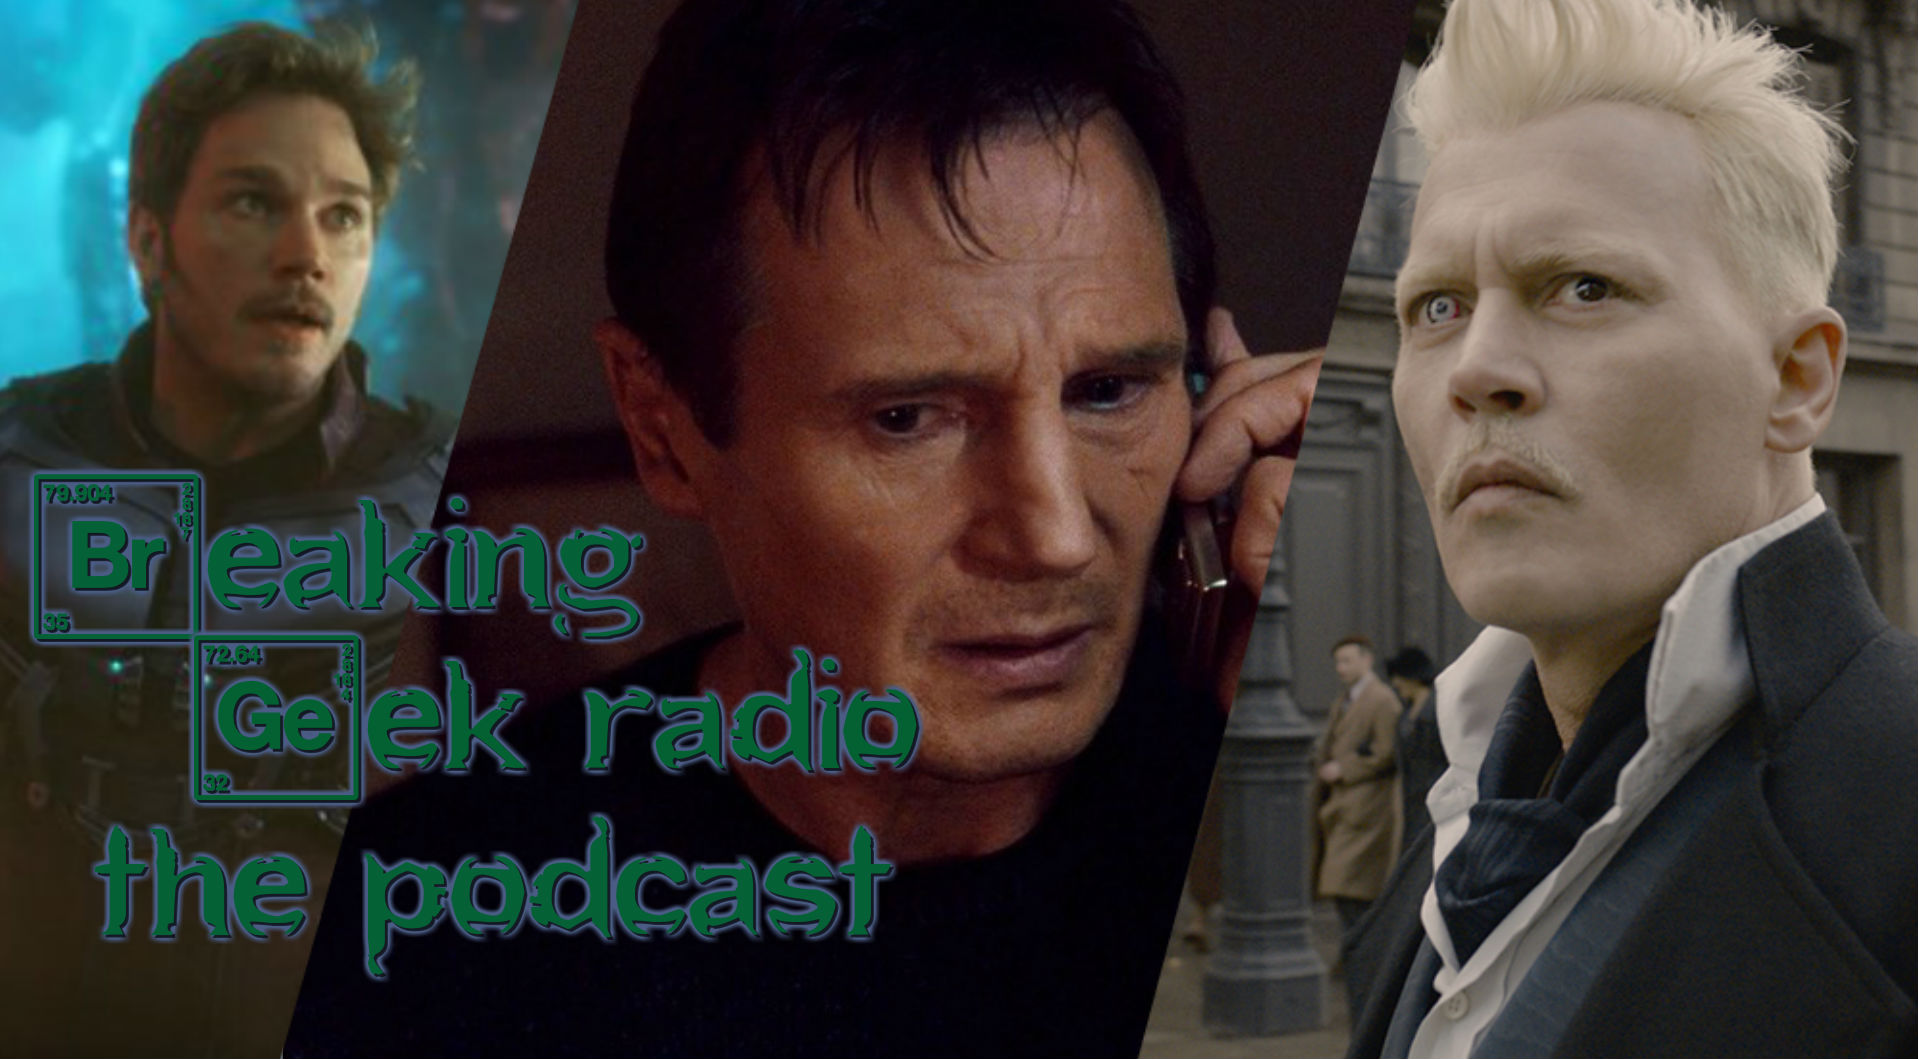 Defense Of The Damned: Stanning For Celebrities | Breaking Geek Radio: The Podcast